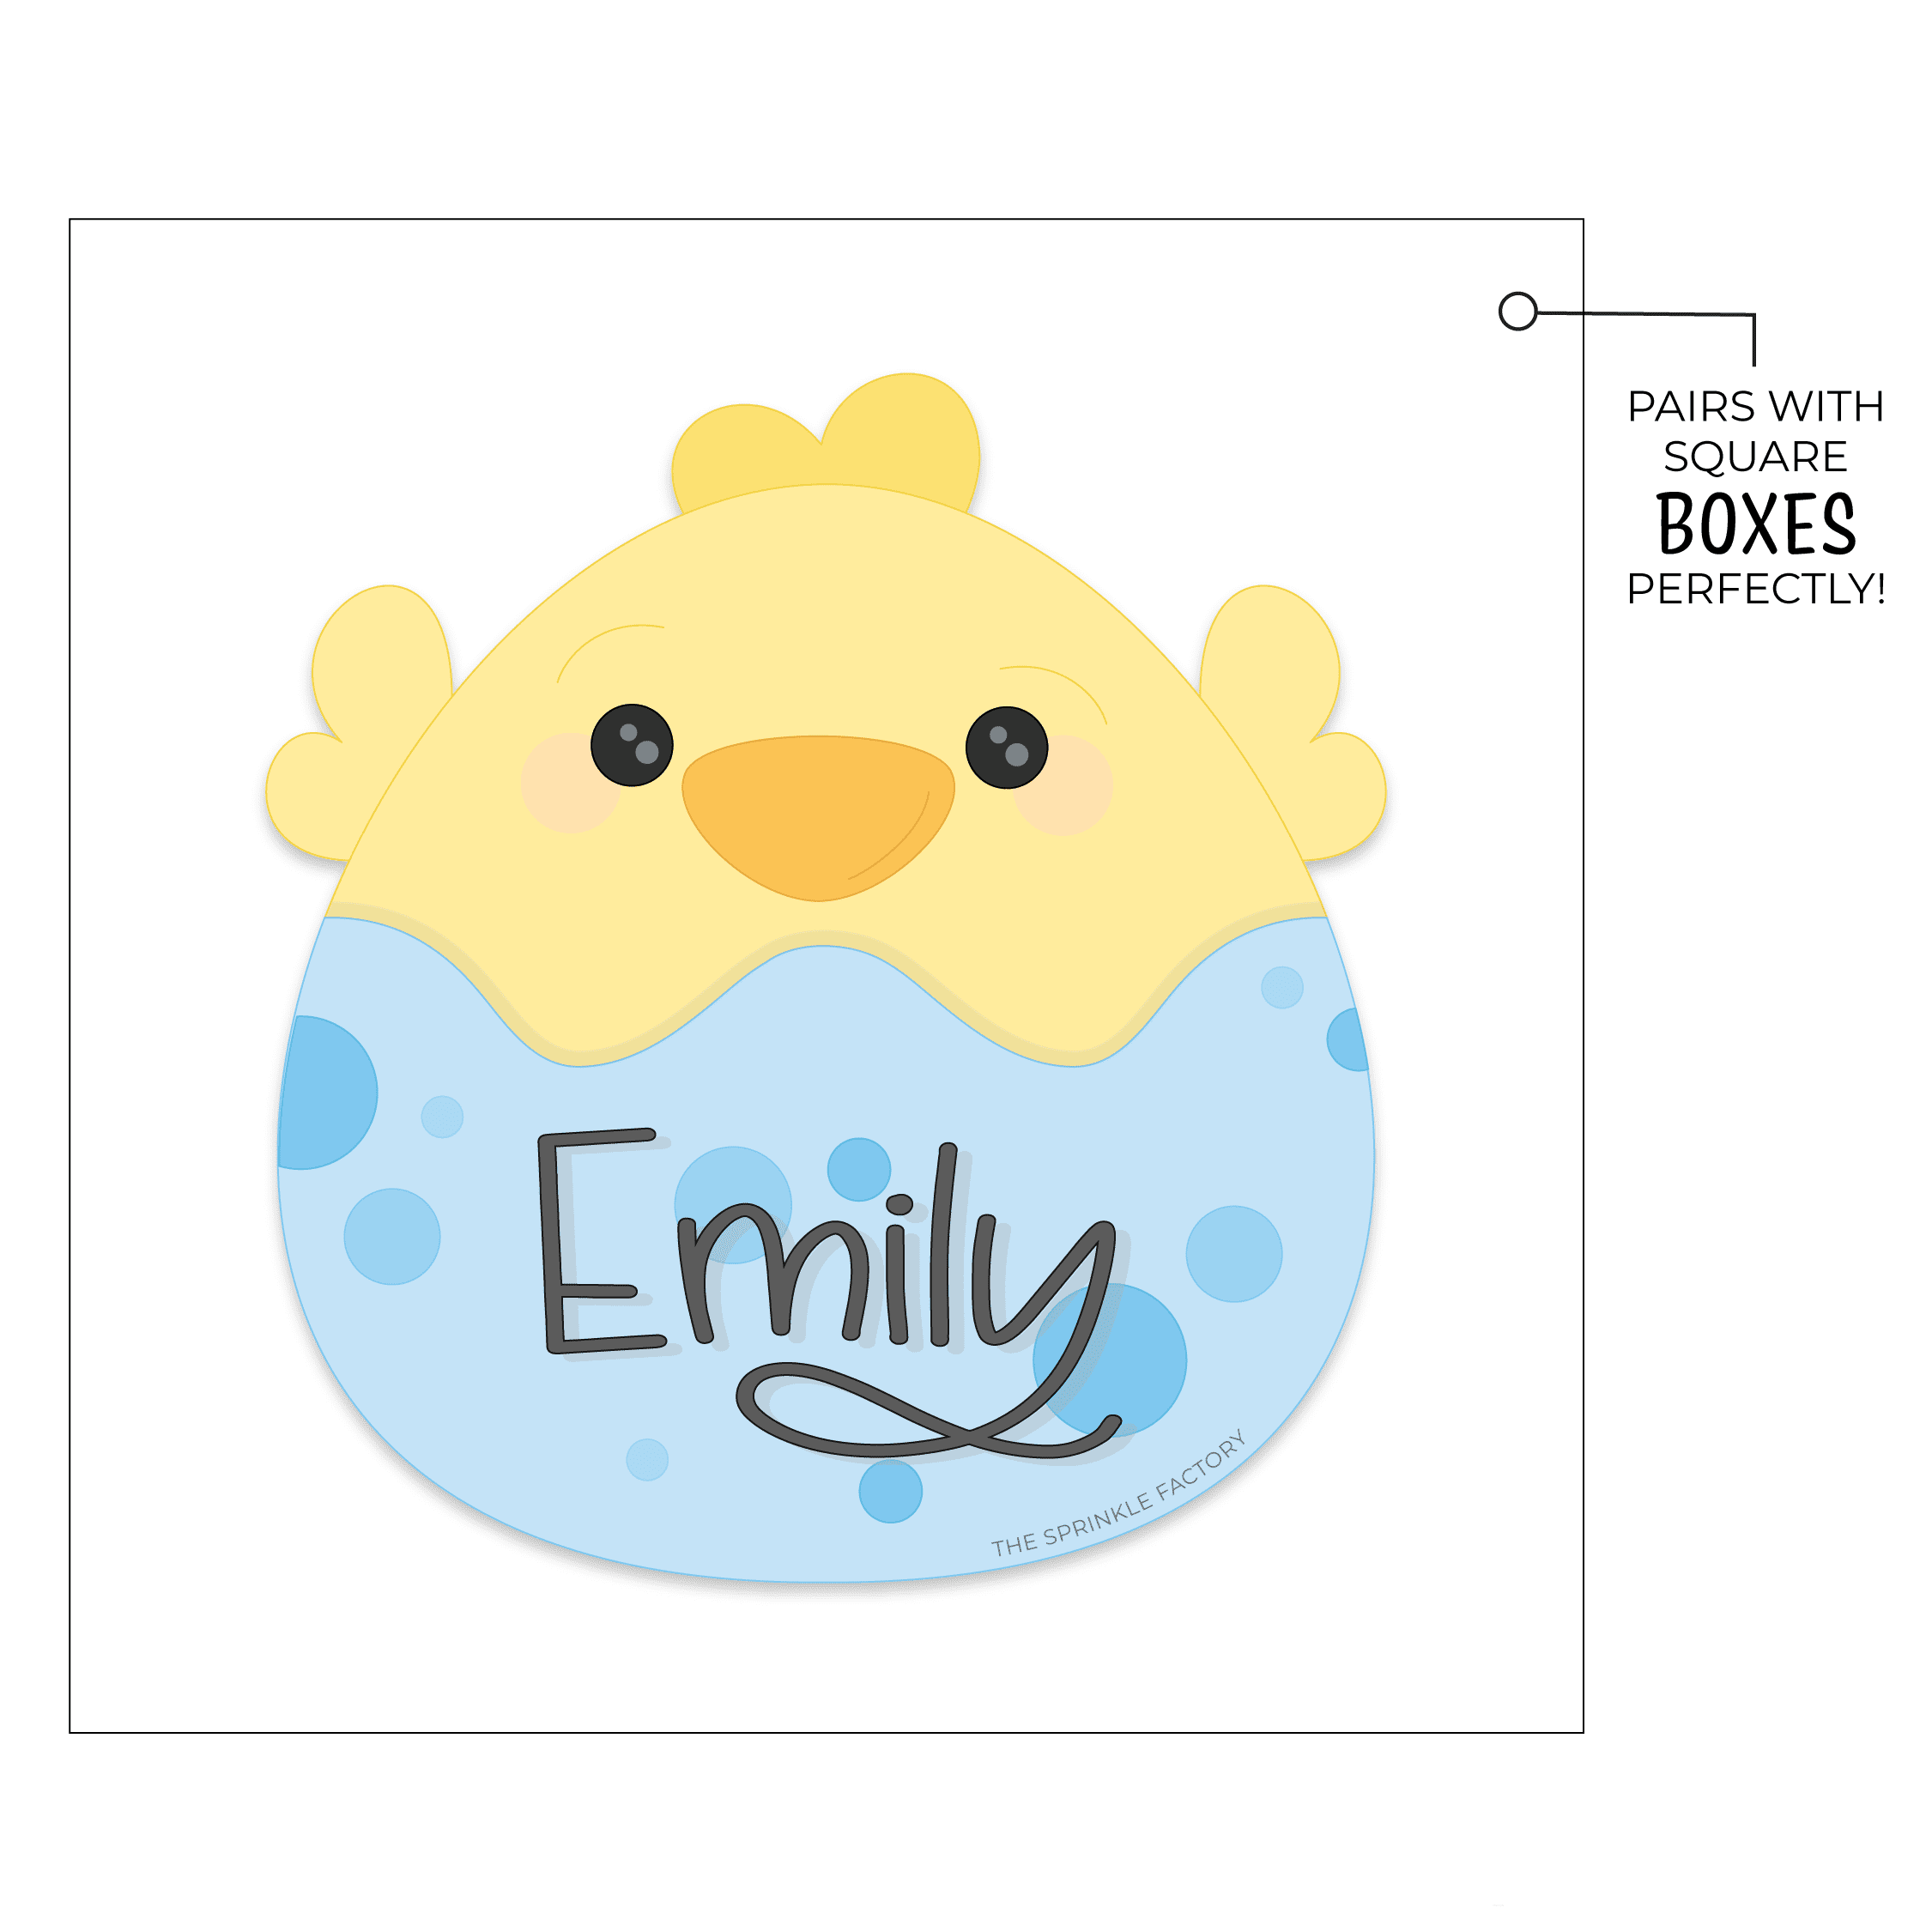 Clipart of a yellow baby chick coming out the top of a blue egg with blue spots on it and the name Emily in black cursive writing.